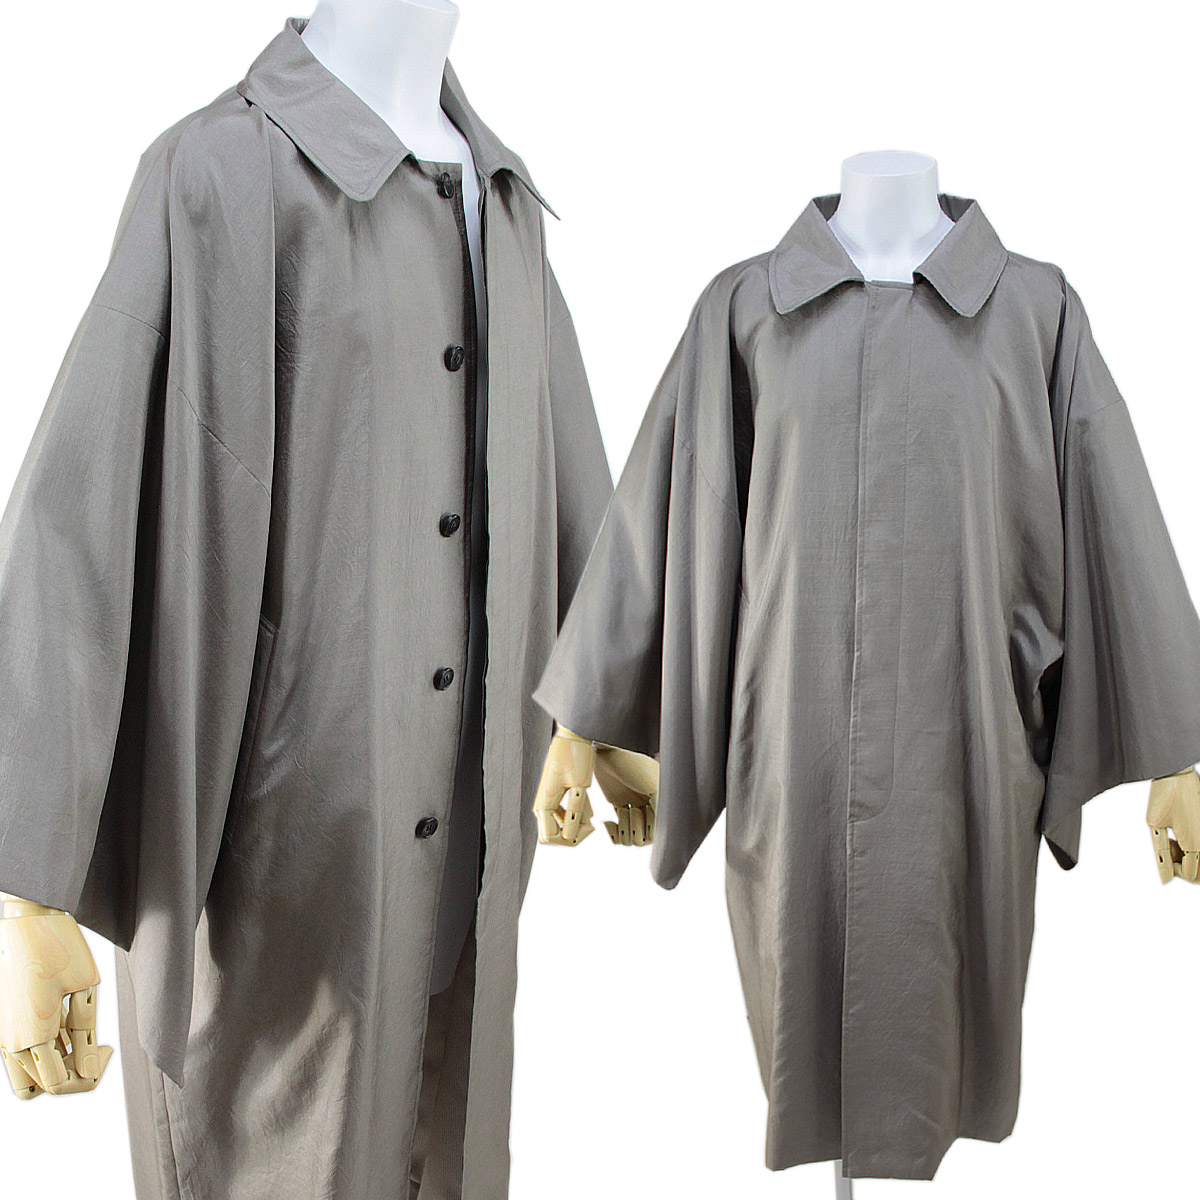  angle sleeve coat men's Japanese clothes coat polyester 100% beige M/L-size